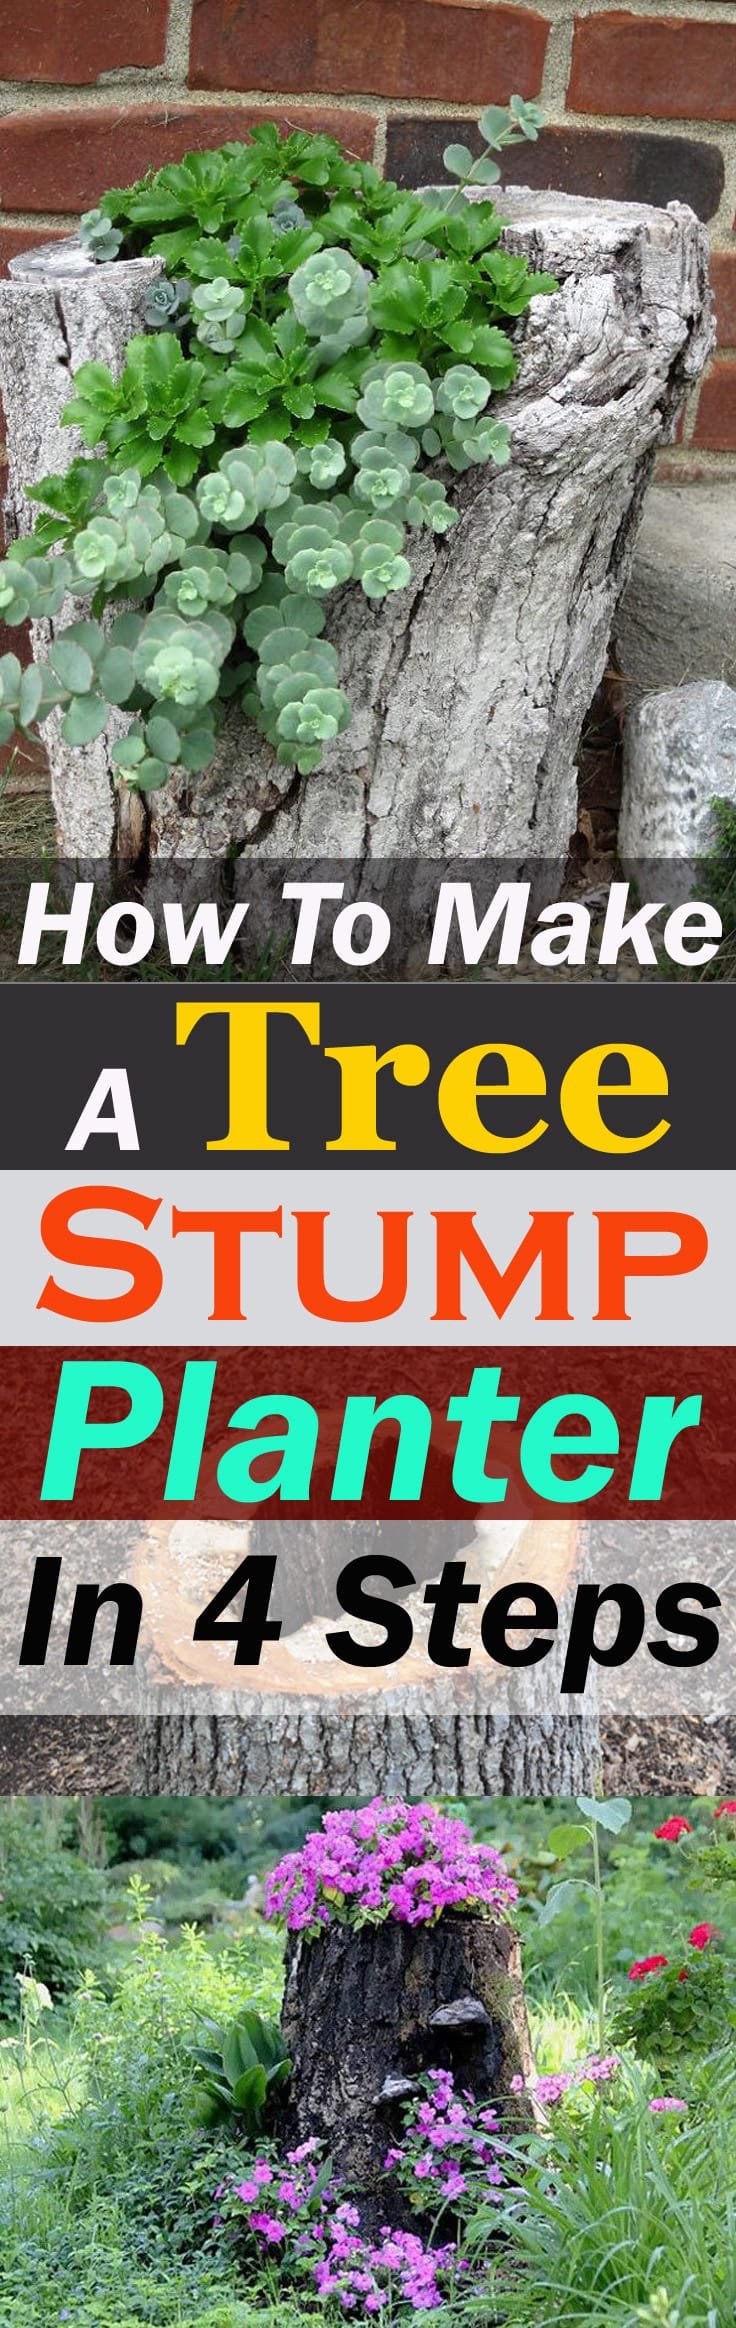 Learn how to make a tree stump planter and make use of an old stump that you want to get rid of.